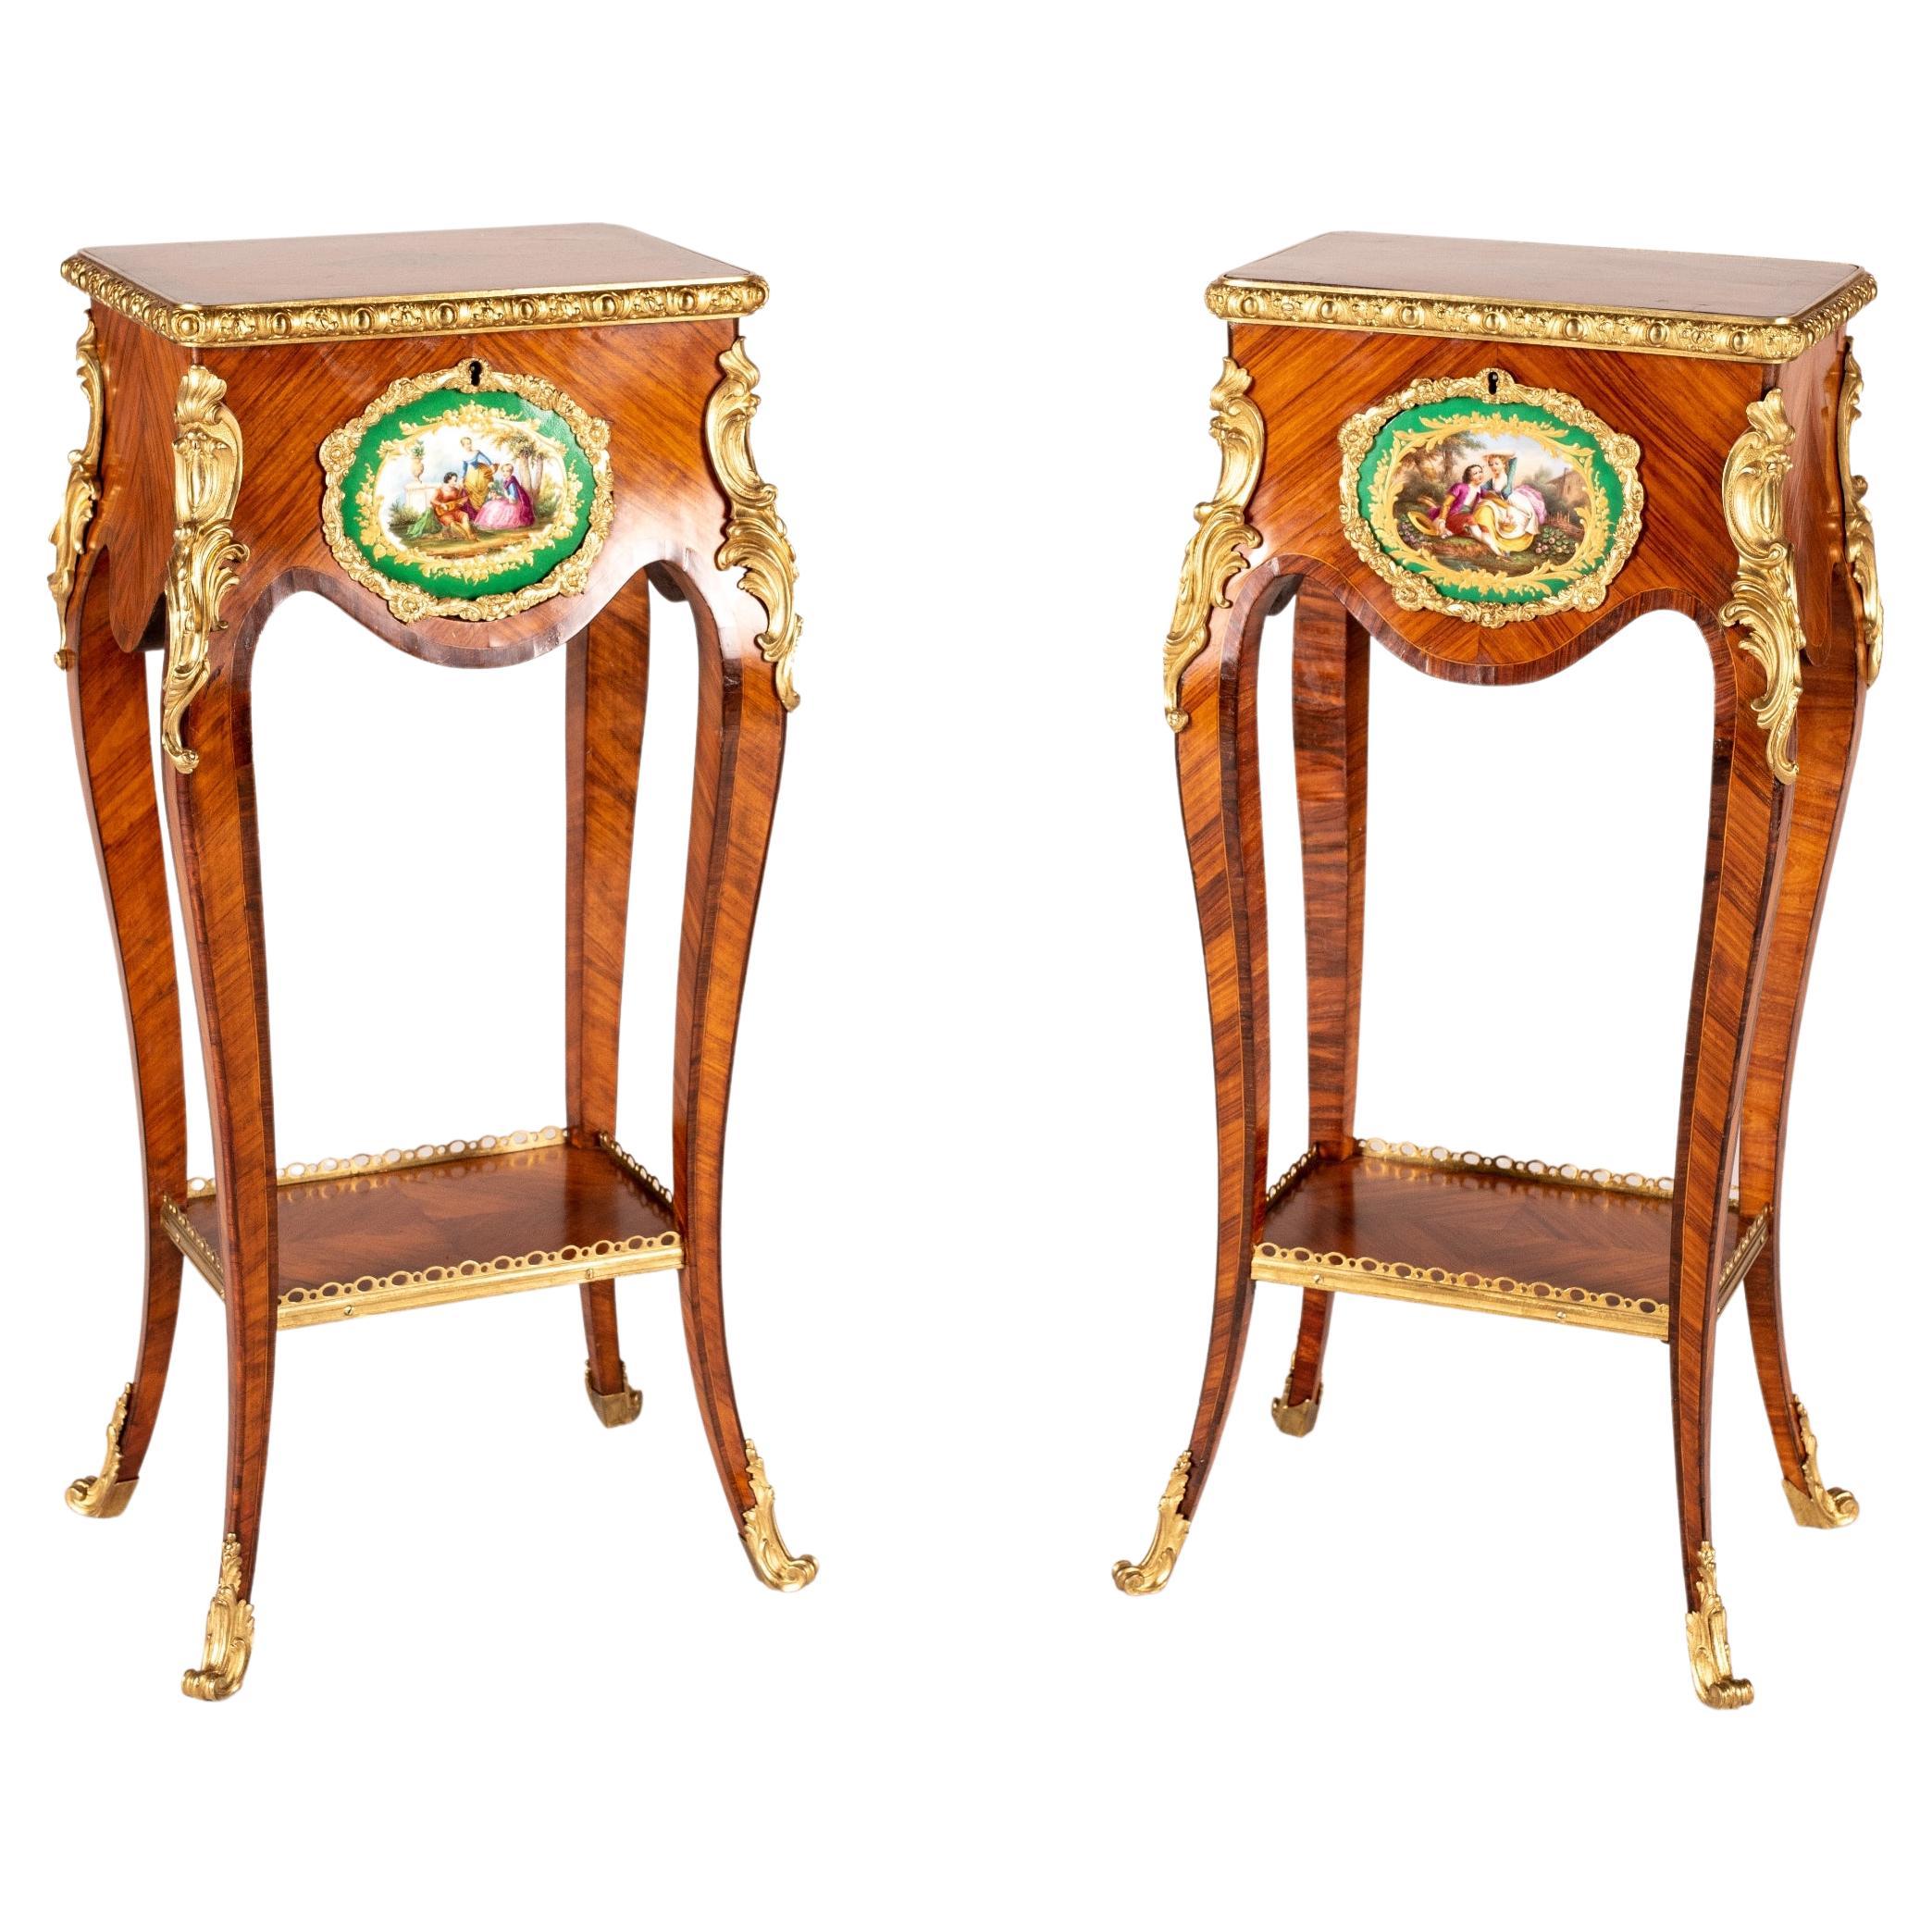 19th Century Pair of Occasional Tables in the Louis XV Transitional Taste For Sale